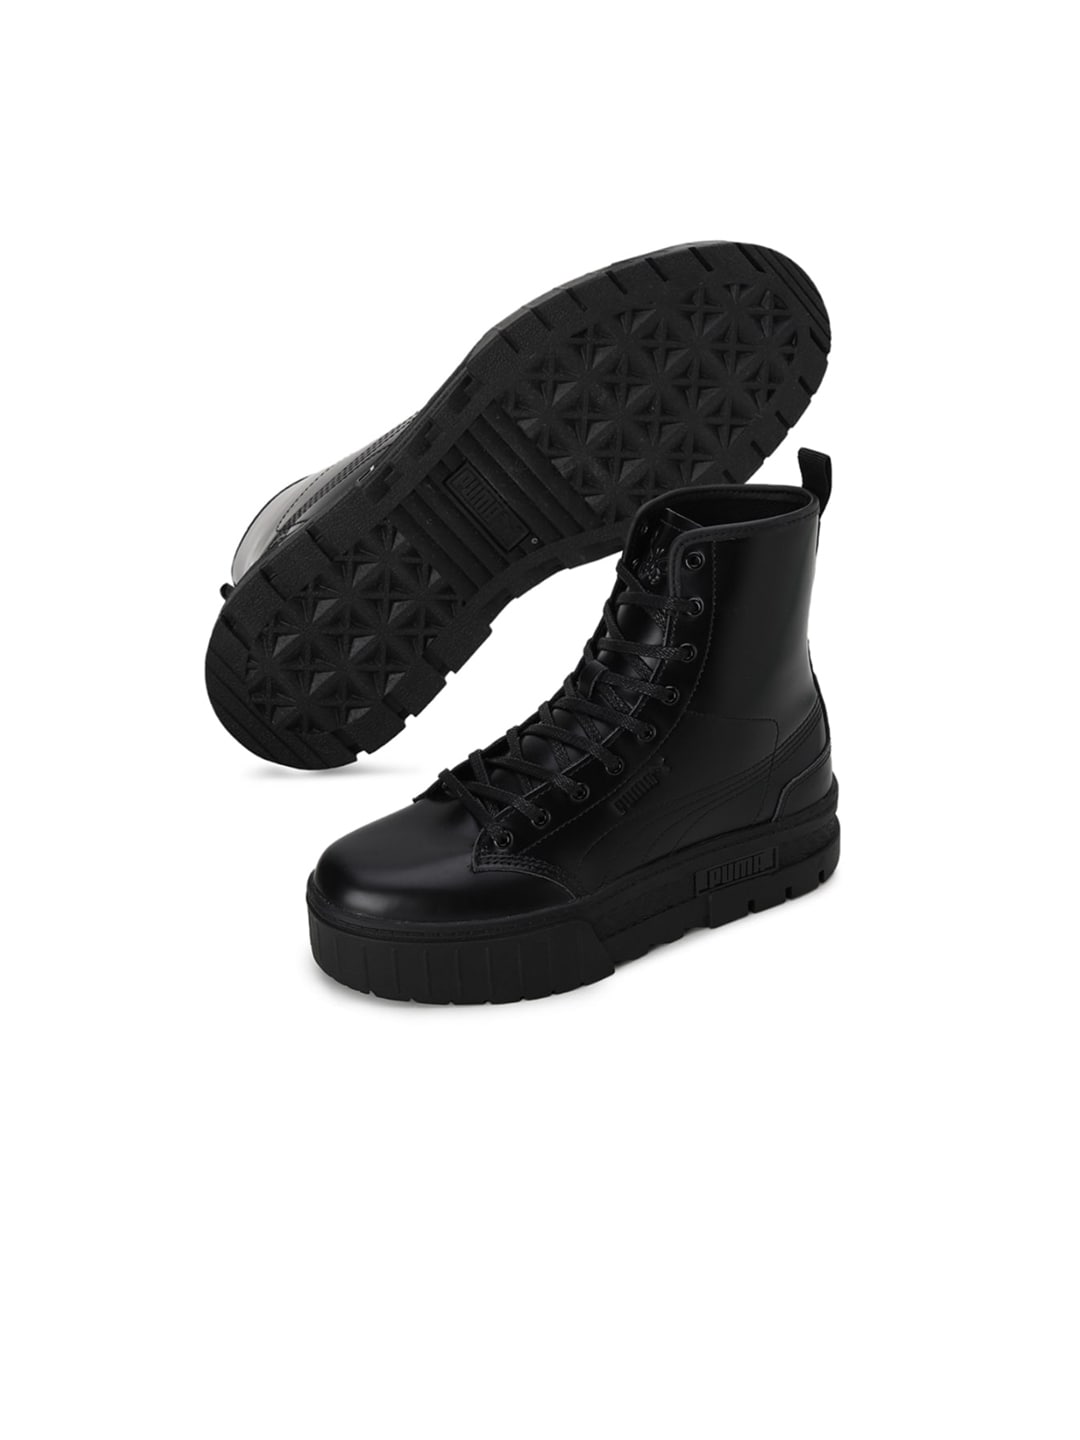 PUMA Woman Black Leather Boots Price in India